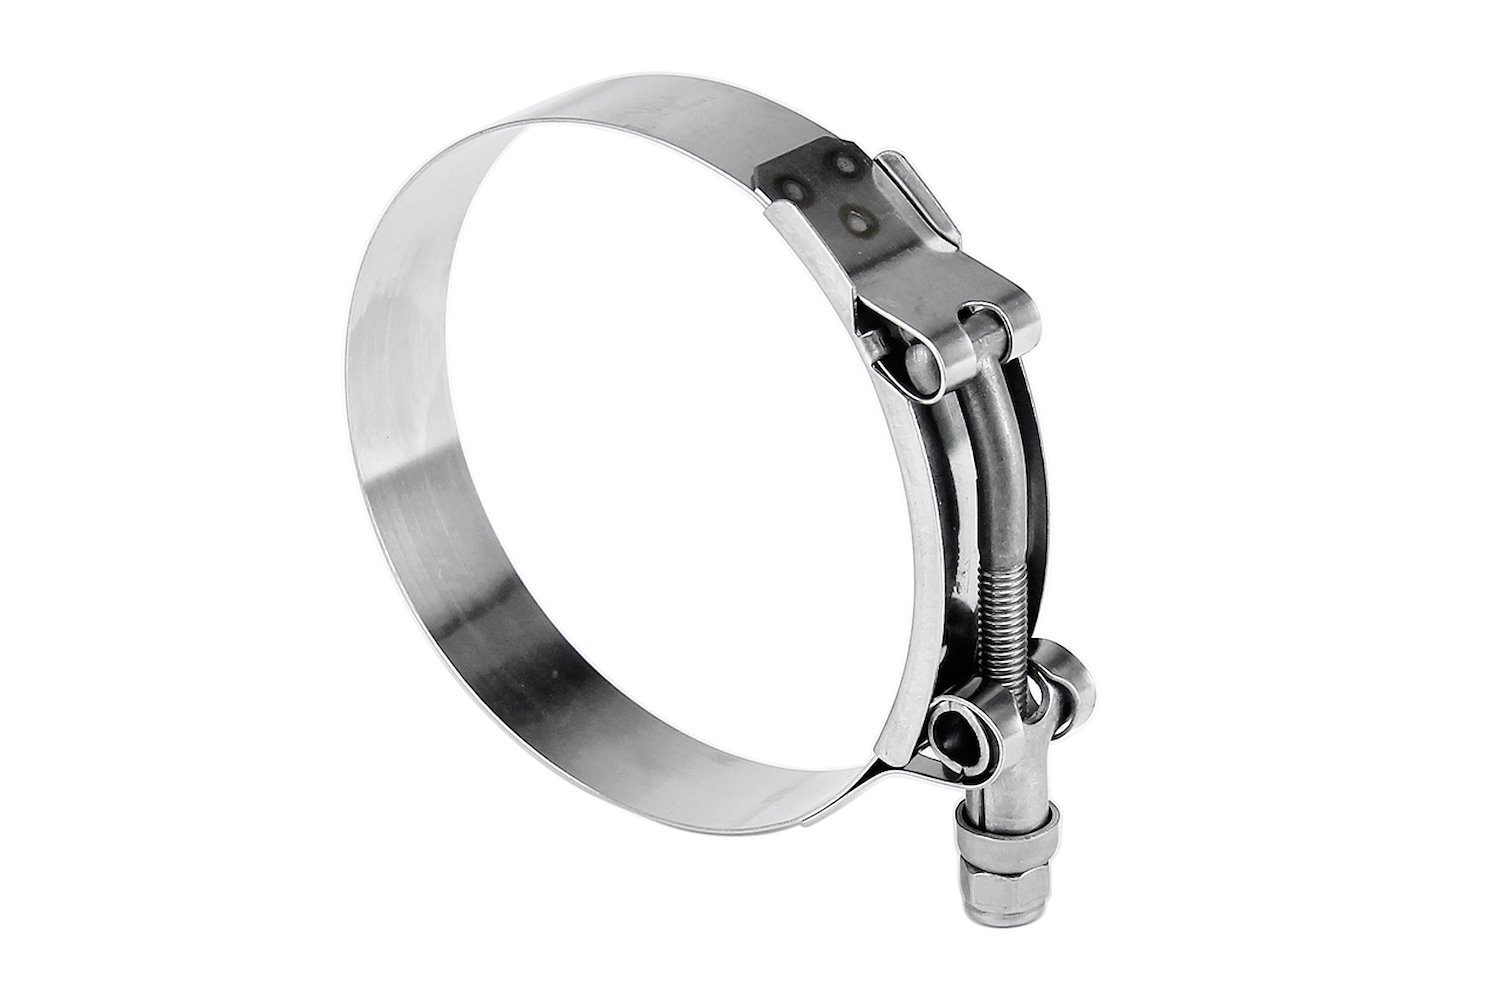 316-SSTC-63-71 100-Percent Marine Grade Stainless Steel T-Bolt Hose Clamp, Size #52, Range: 2.5 in.- 2.8 in.